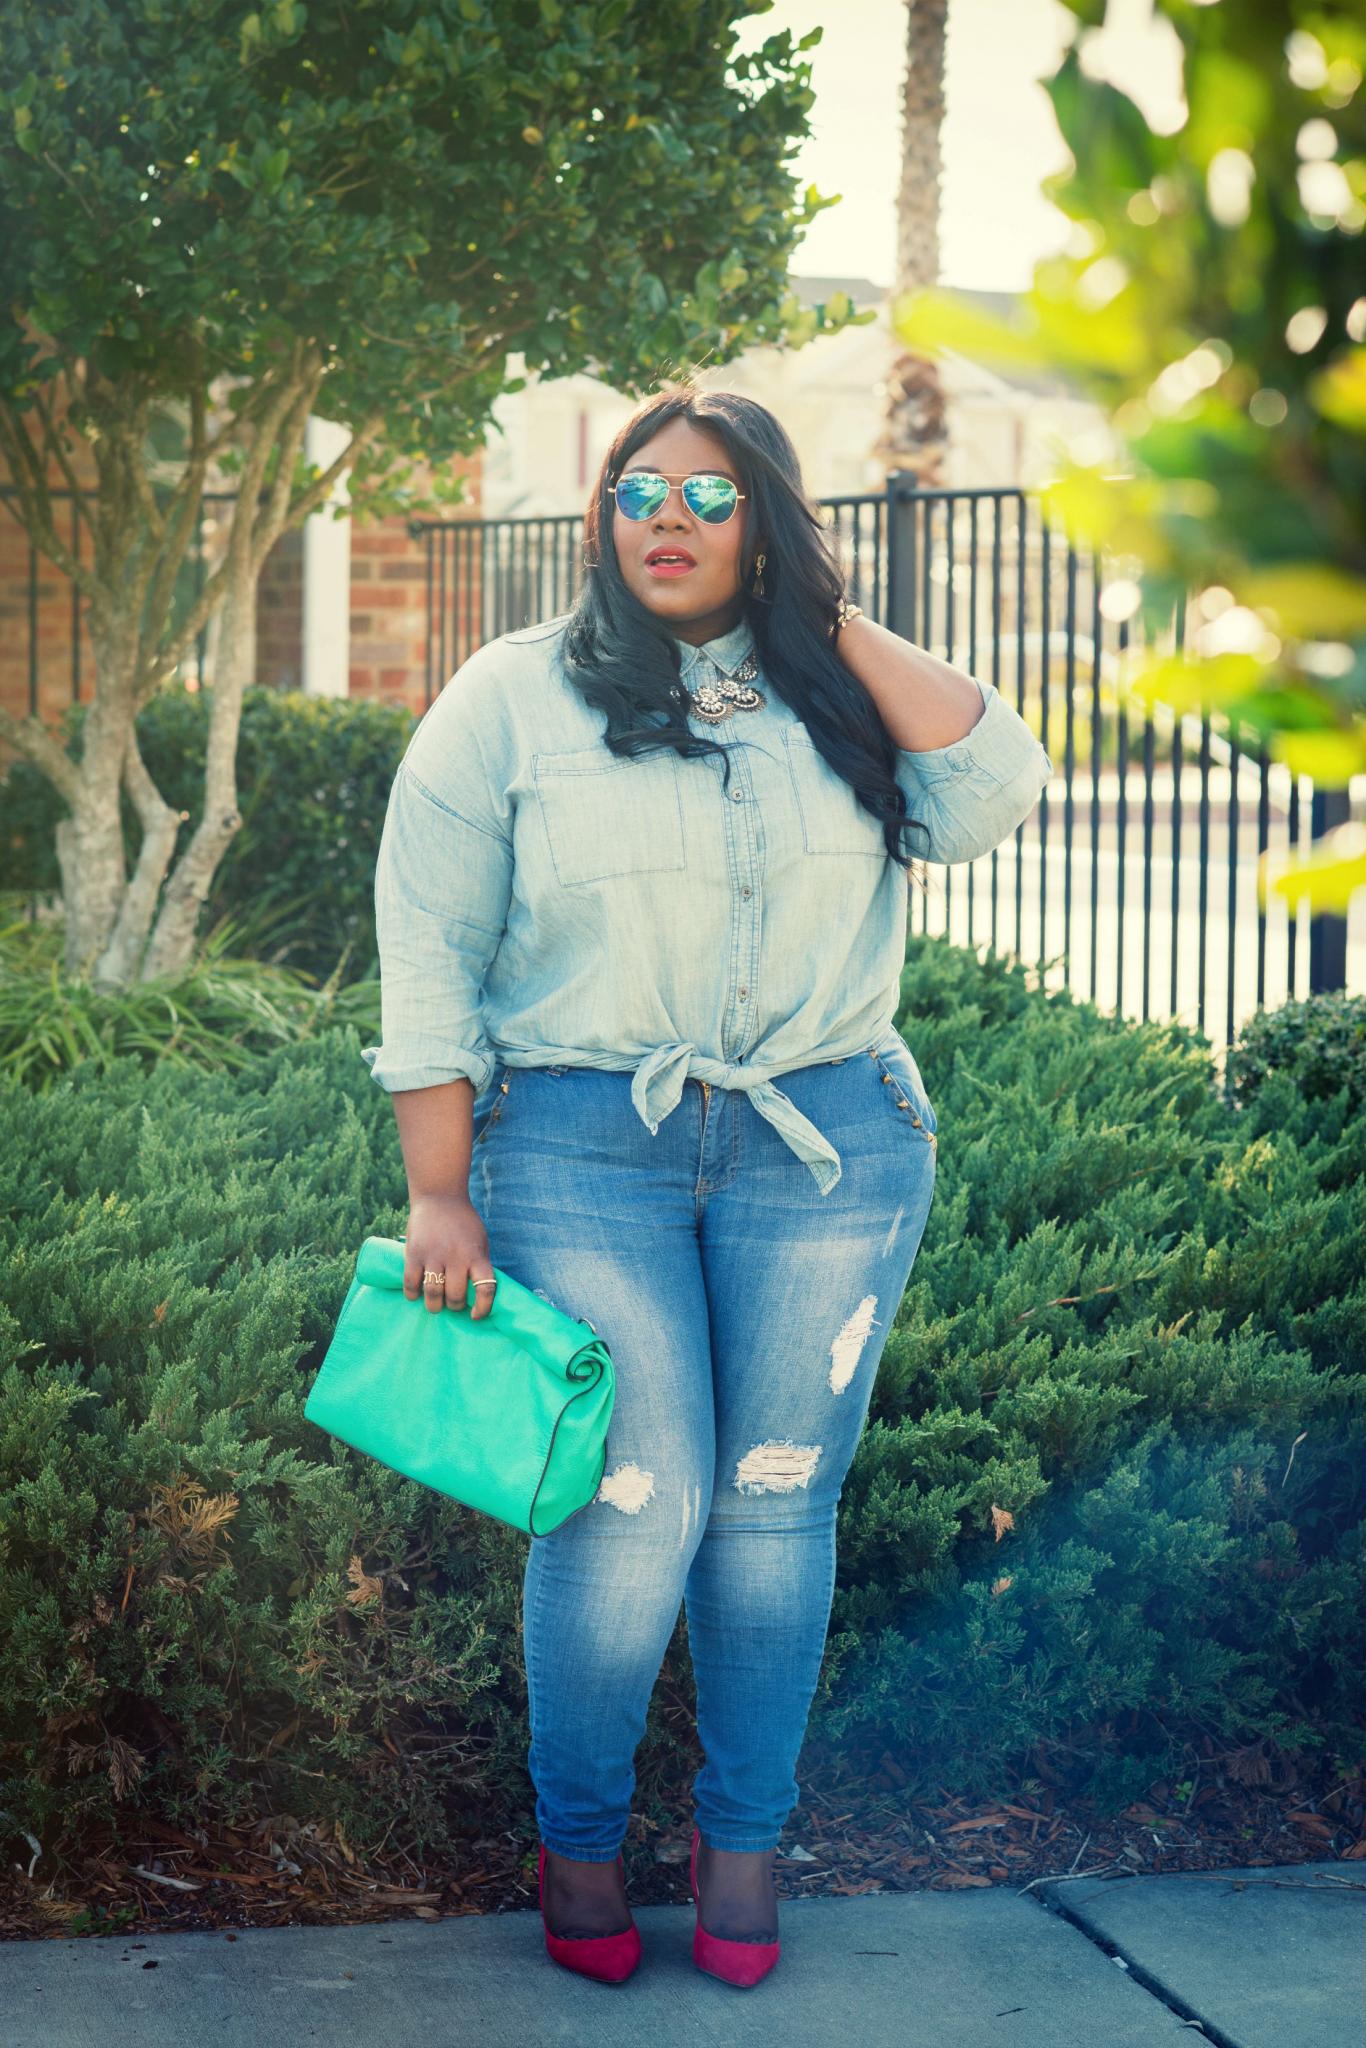 A Curvy Girl's Guide To Denim
